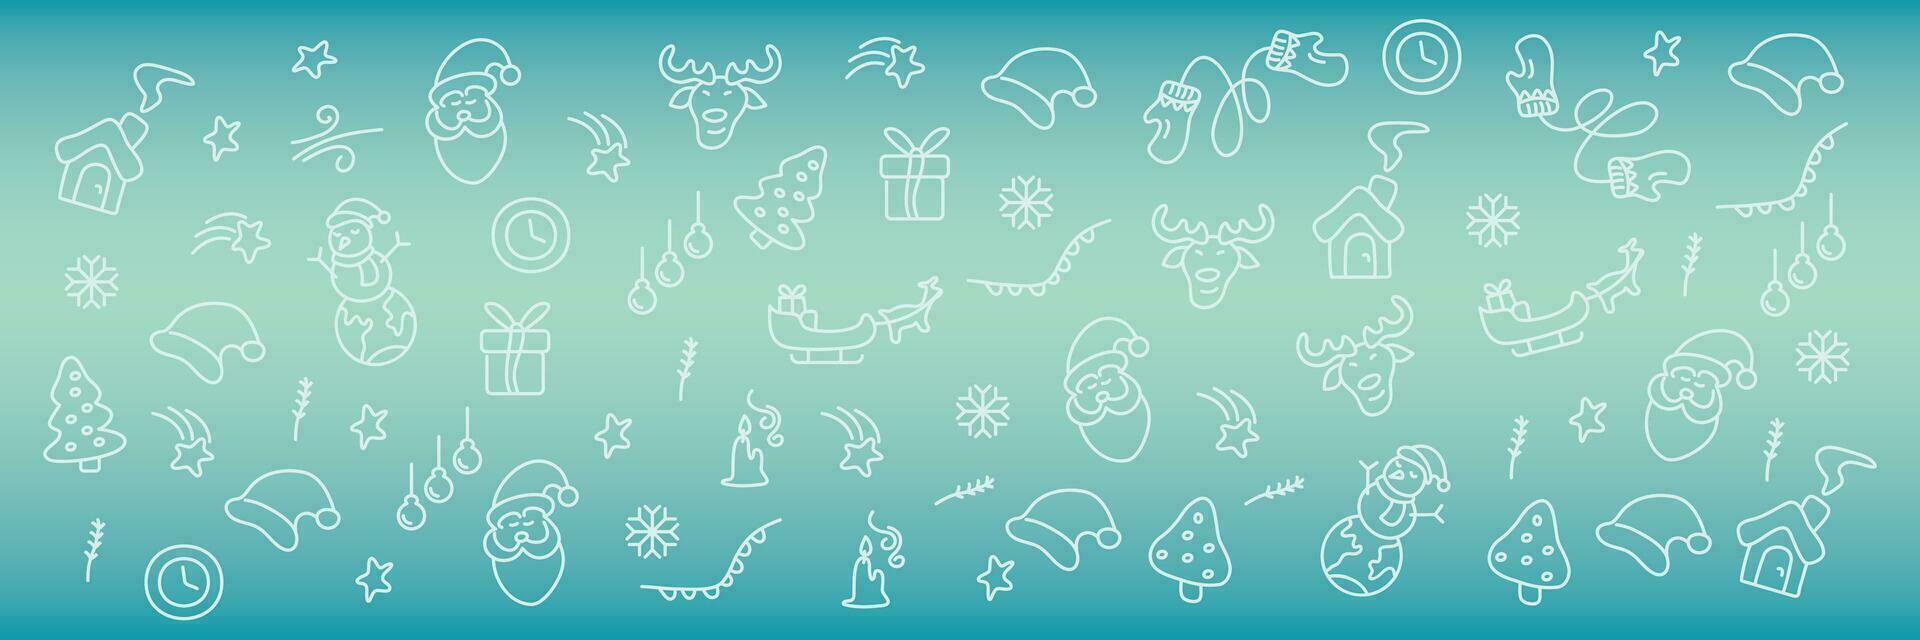 a set of hand drawn icons on a blue background vector